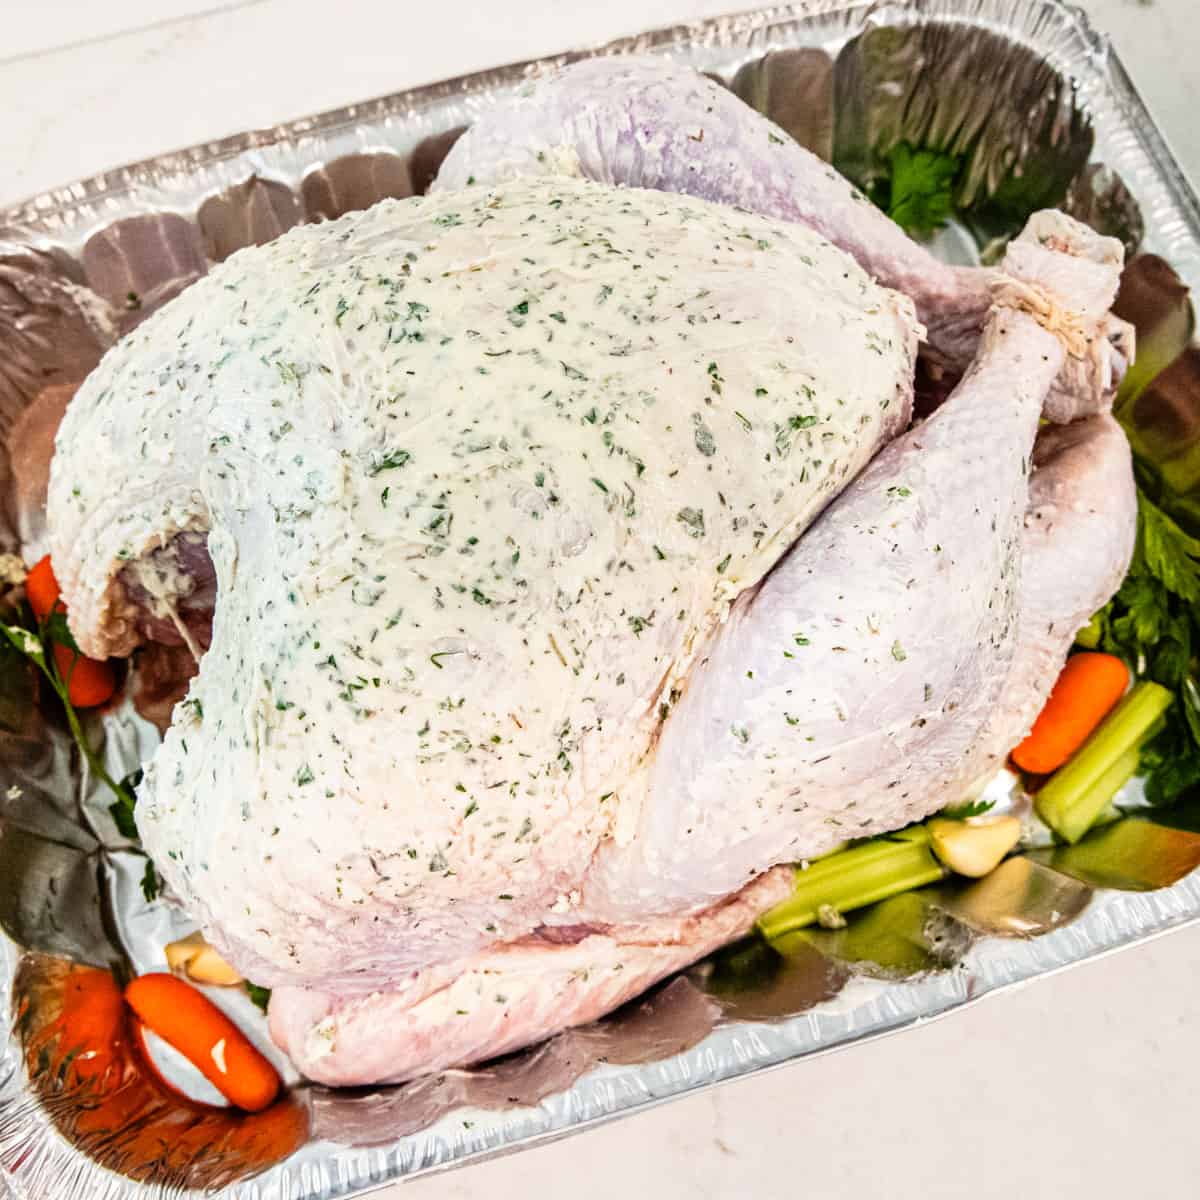 A whole turkey coated with herb butter and set in a roasting pan.